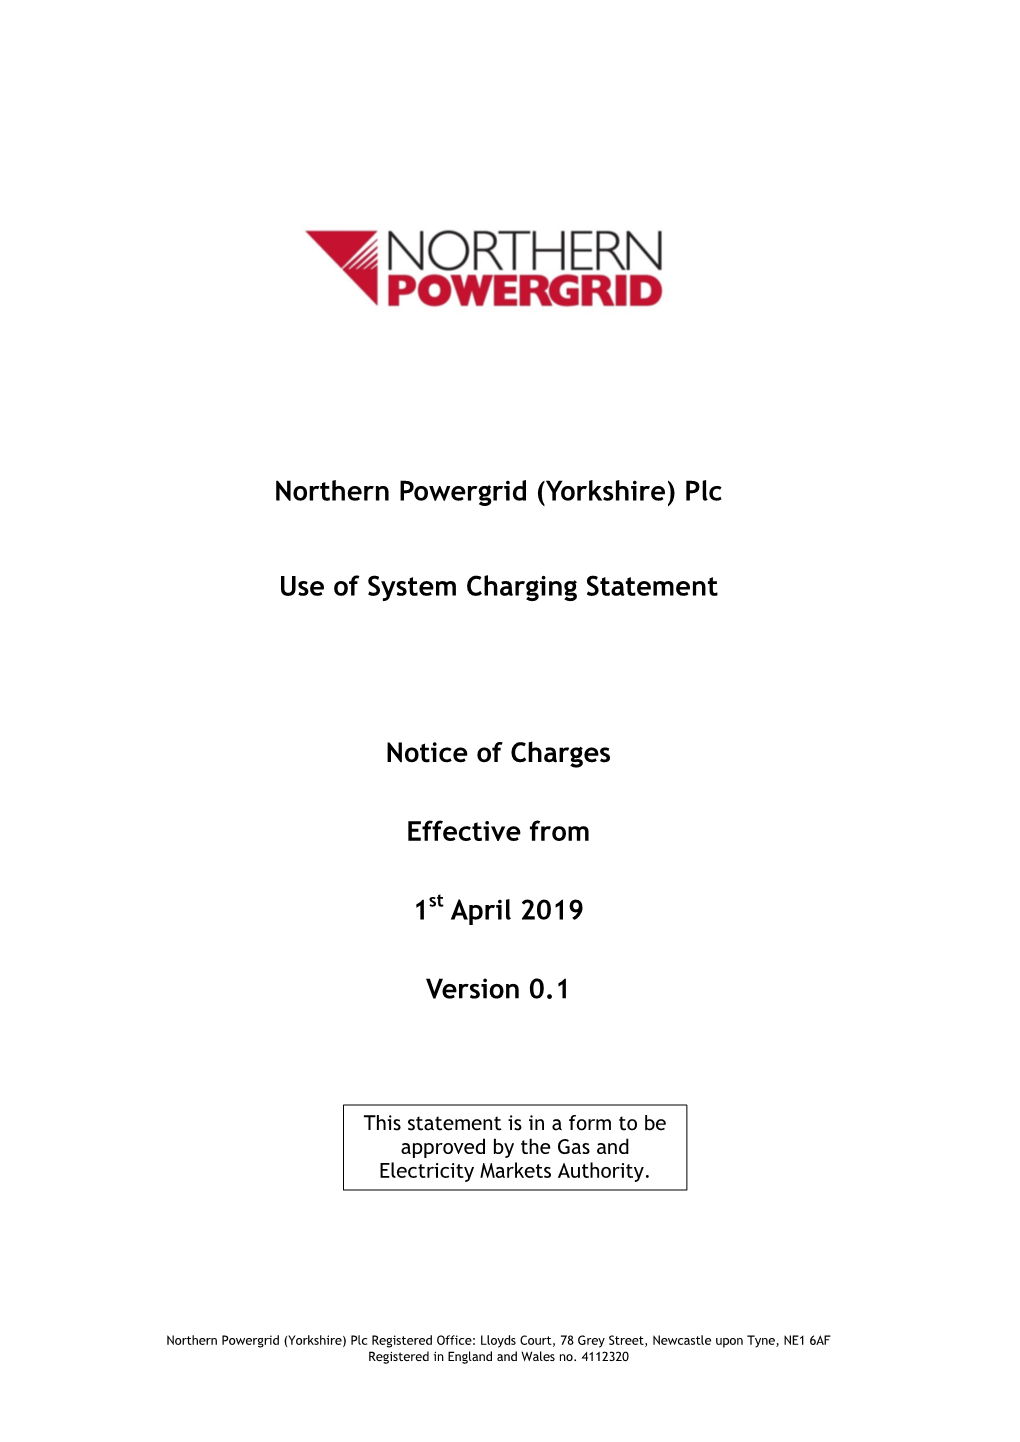 Northern Powergrid (Yorkshire) Plc Use of System Charging Statement